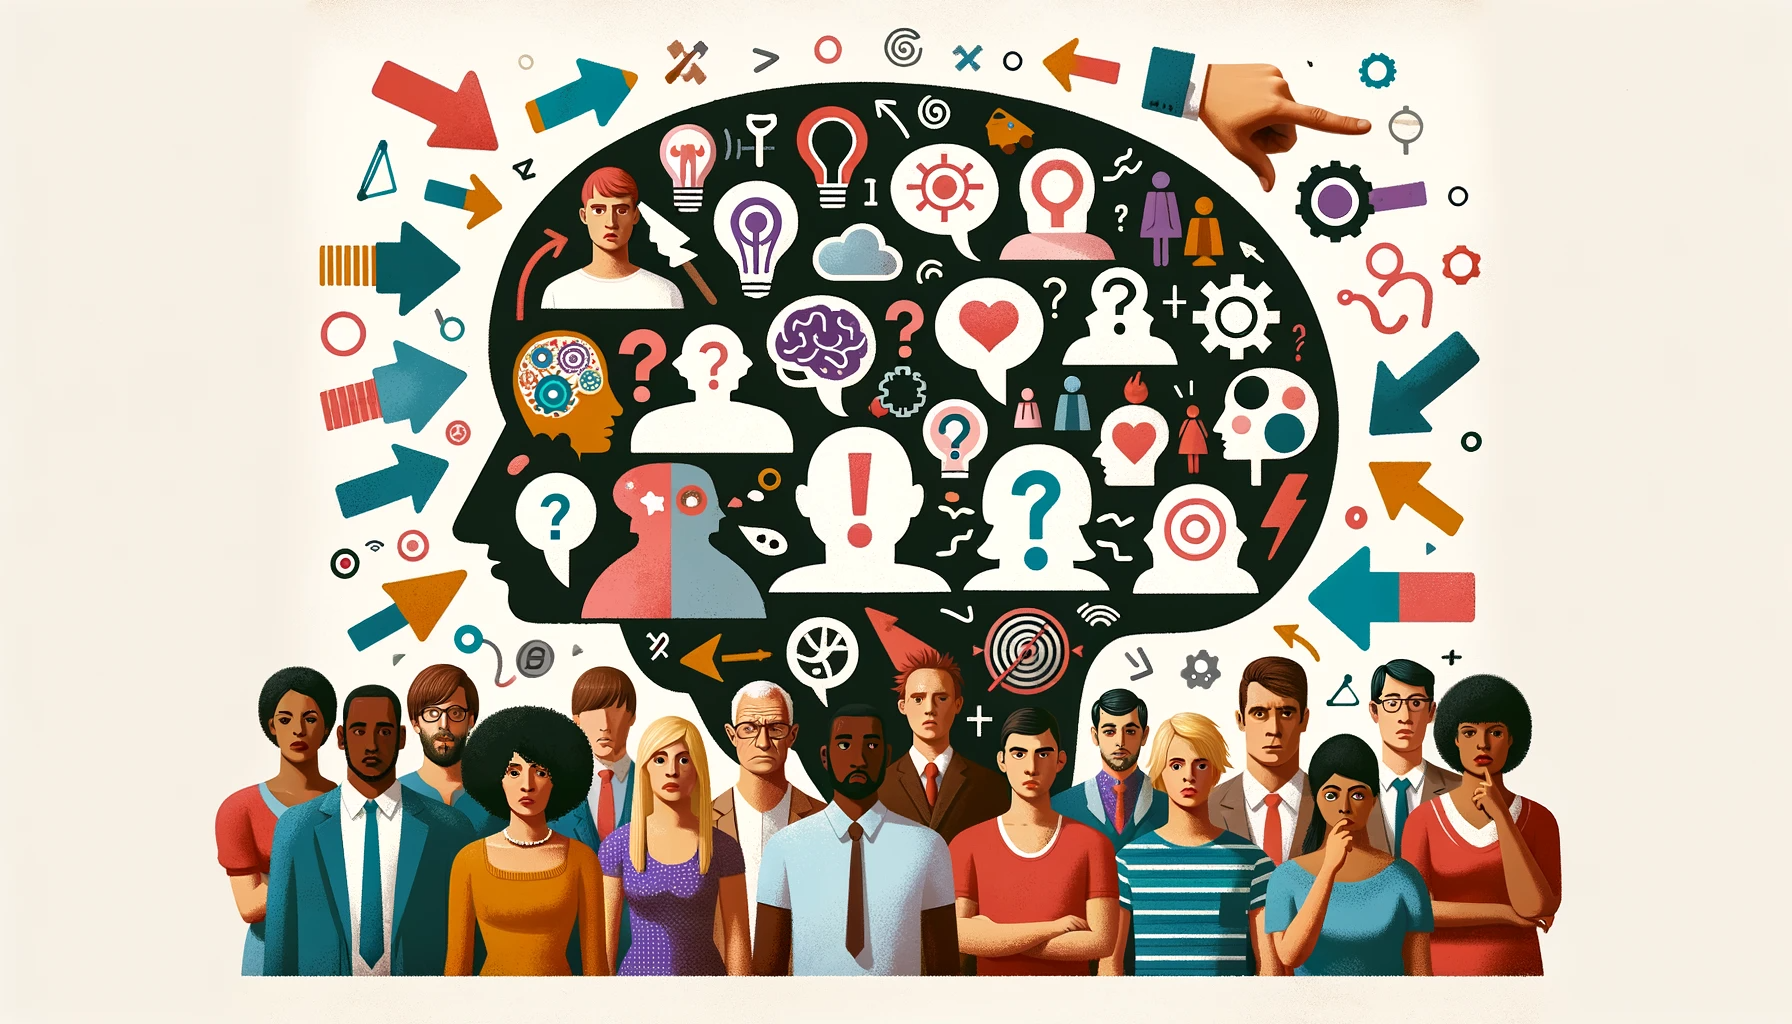 people illustration with large brain and idea callouts all around